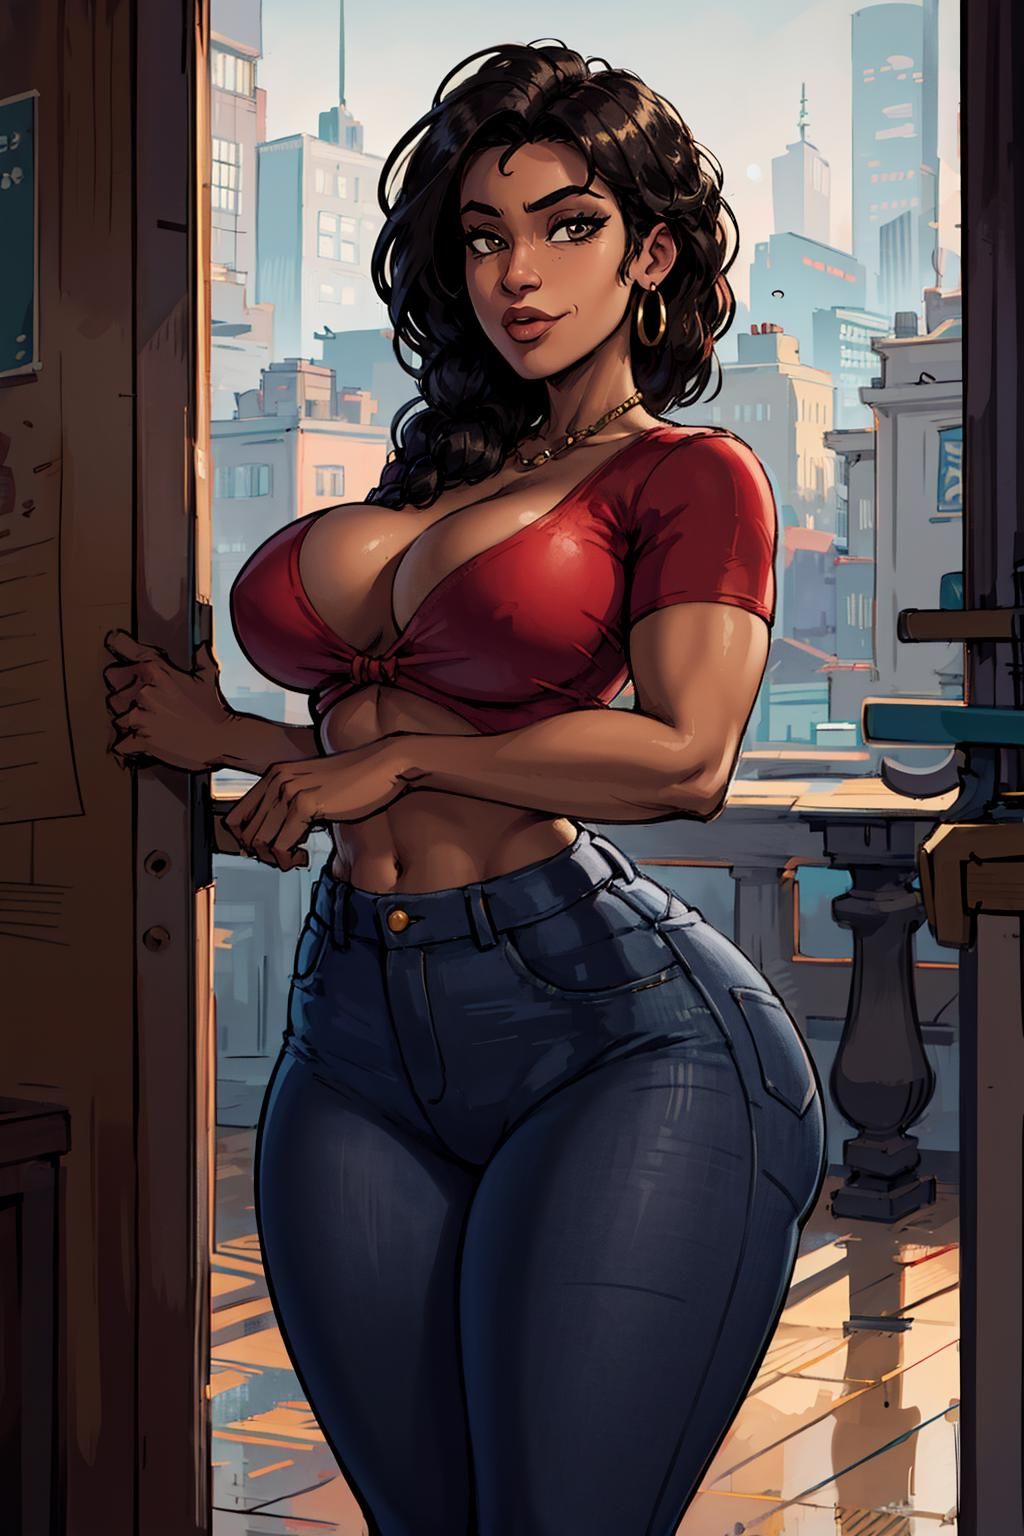 Female,Game Characters,Rio Morales is the mother of Miles Morales, from the Spiderverse series of movies, the Insomniac Spiderman games and the Ultimate Spiderman comics.